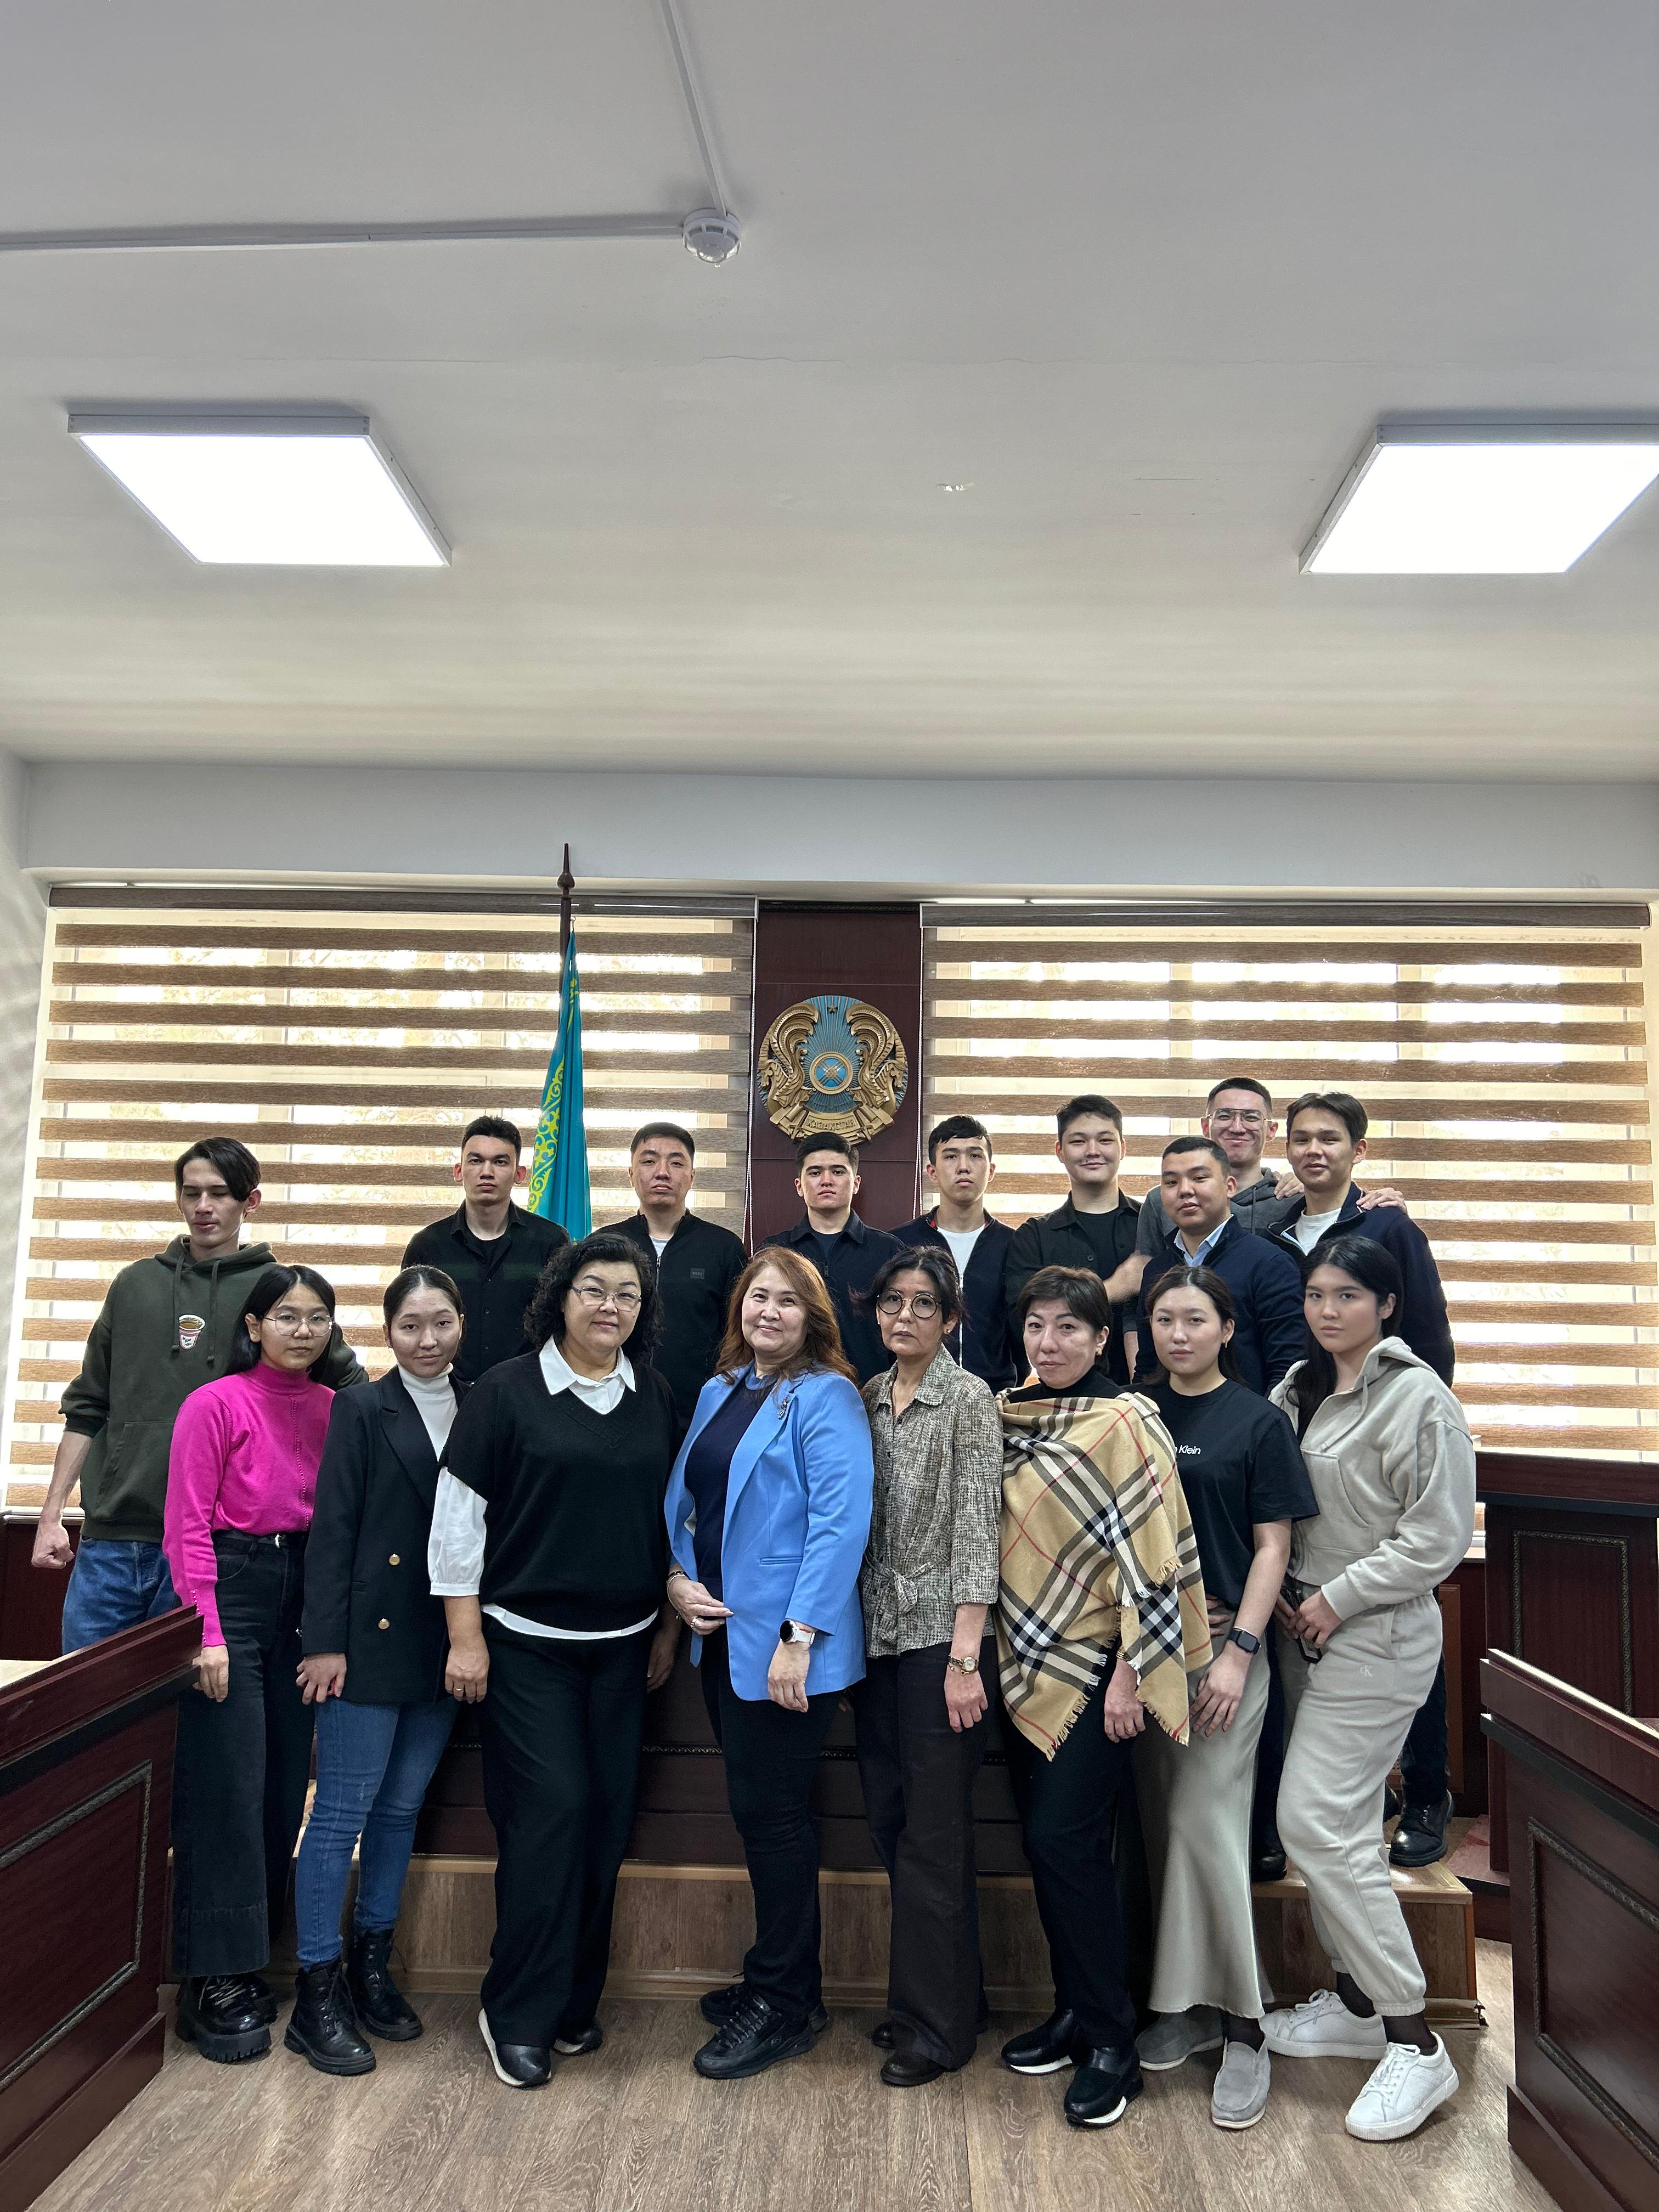 On February 14, 2024, the Department of Civil Law and Civil Procedure, Labor Law, dedicated to the 90th anniversary of Al-Farabi Kazakh National University, held a guest lecture on the 16th goal of the UN SDGs “Peace, Justice and effective Institutions".